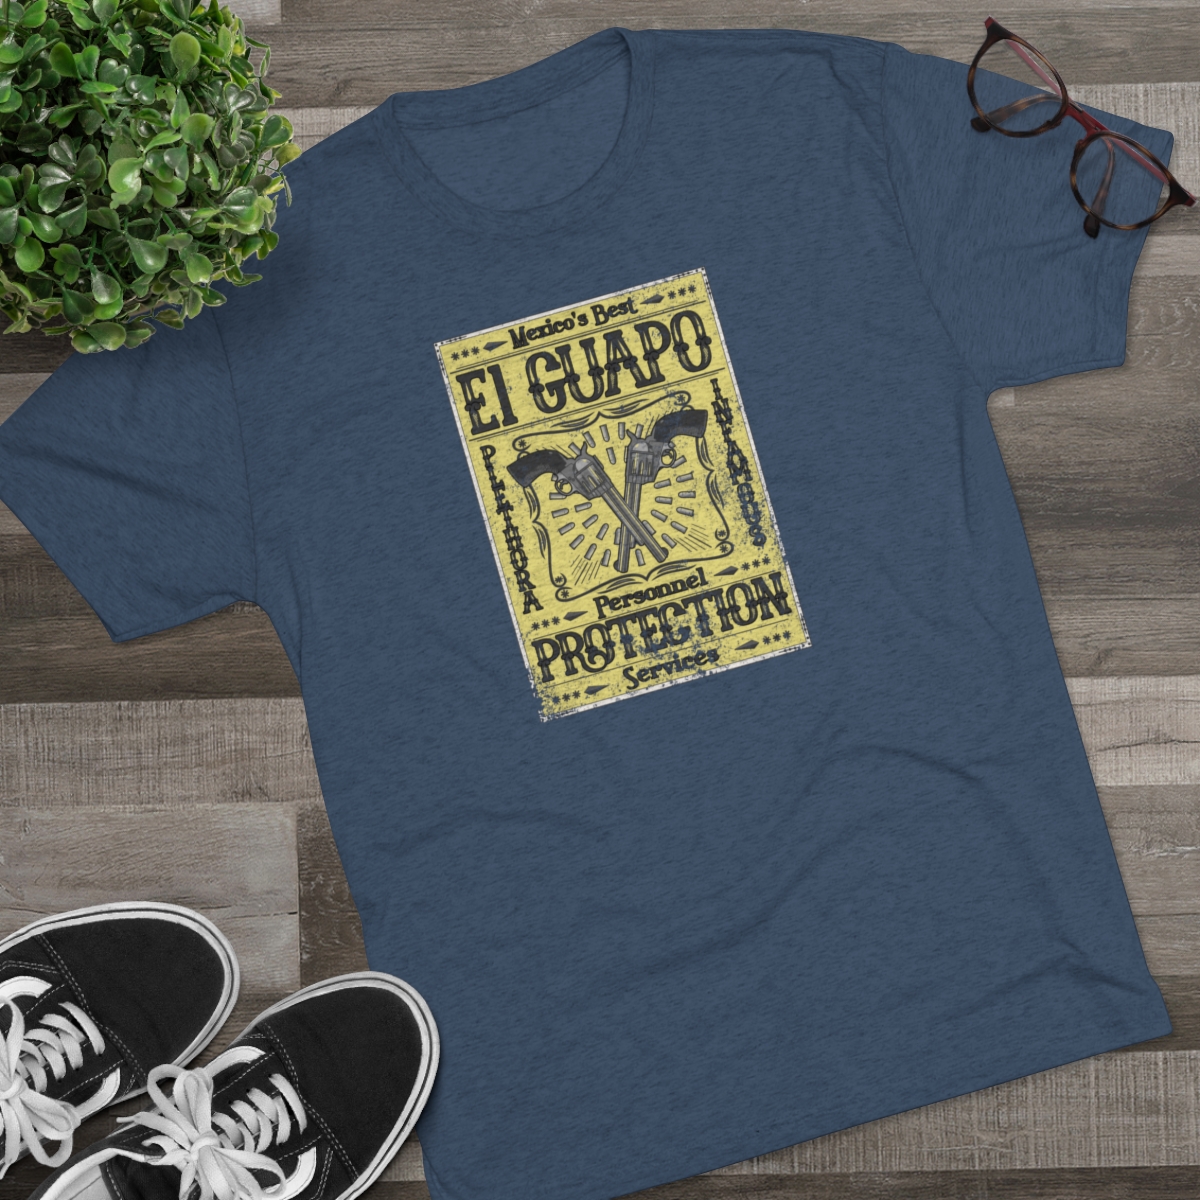 Personnel Protection (yellow) - Unisex Tri-Blend Crew Tee